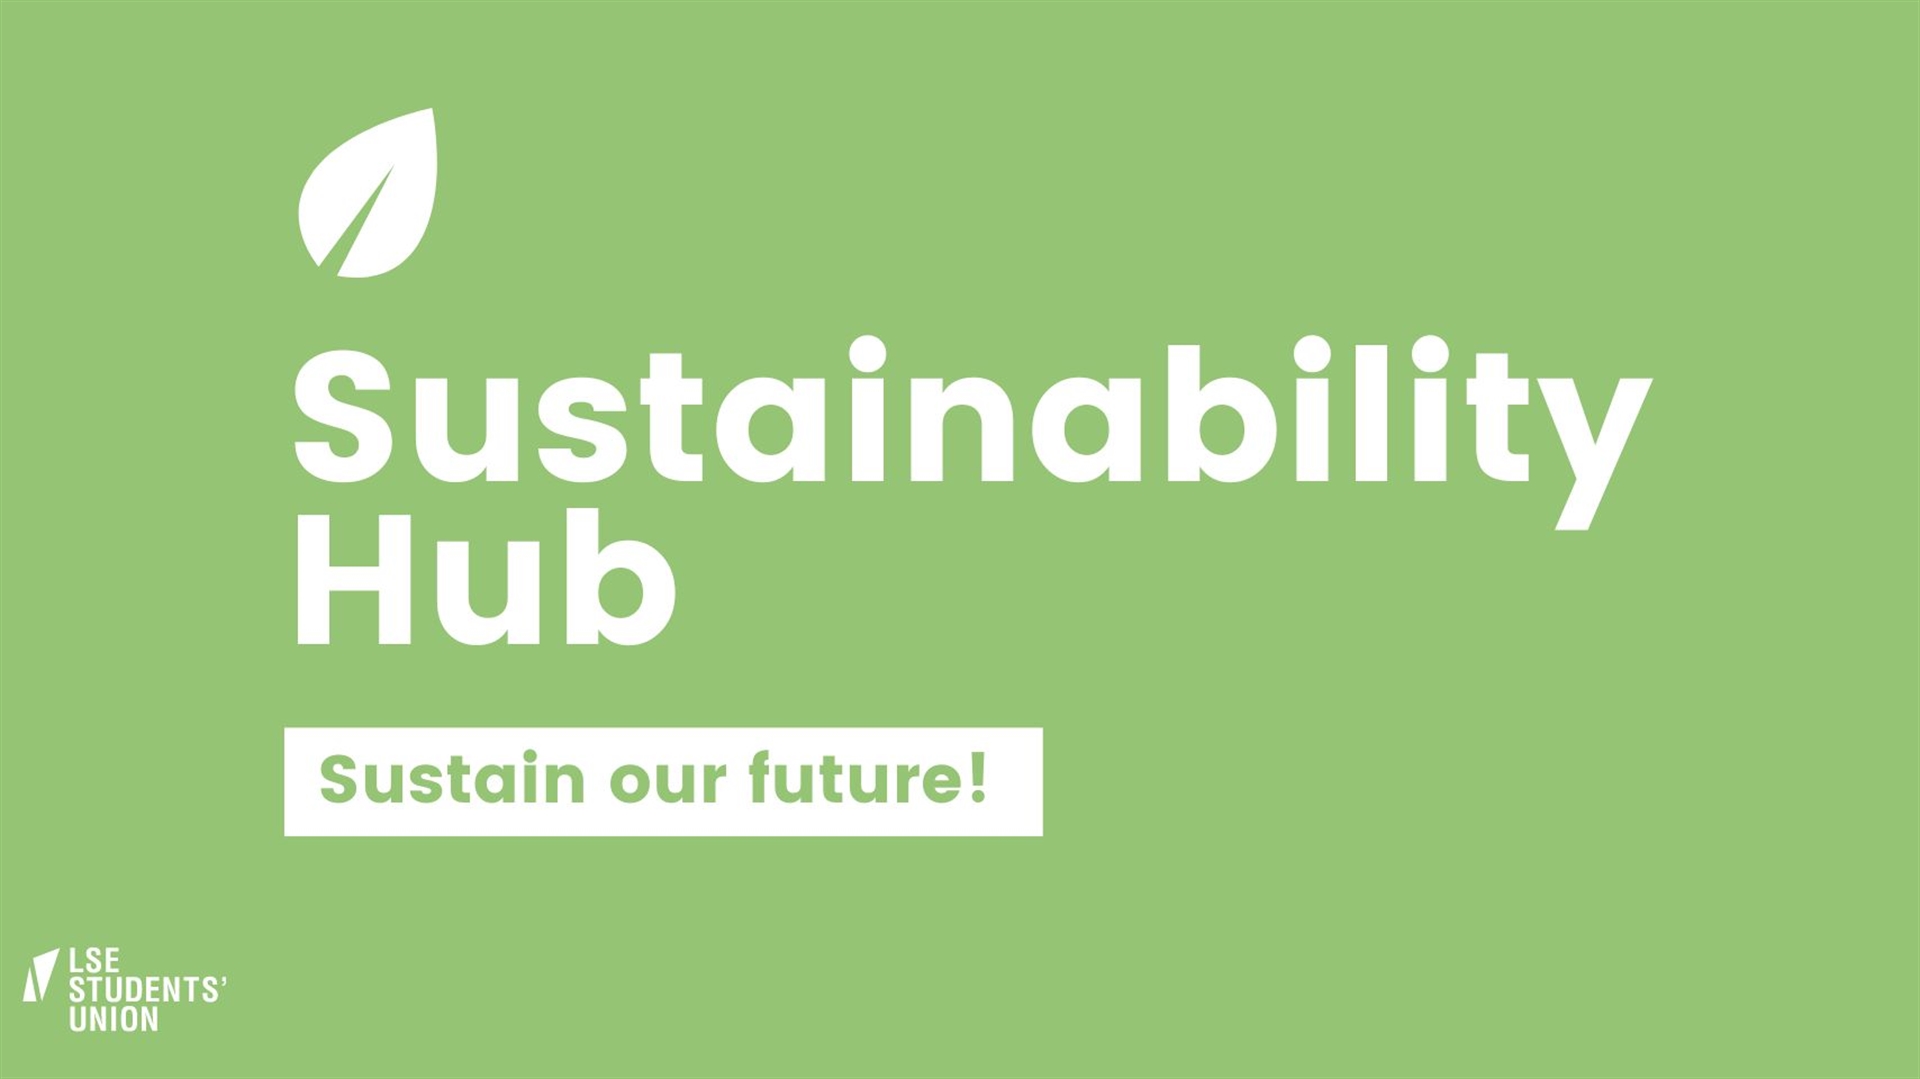 LSESU are host to several sustainability/environment focussed societies, have a peruse and see if there are any that you’d like to get involved with!